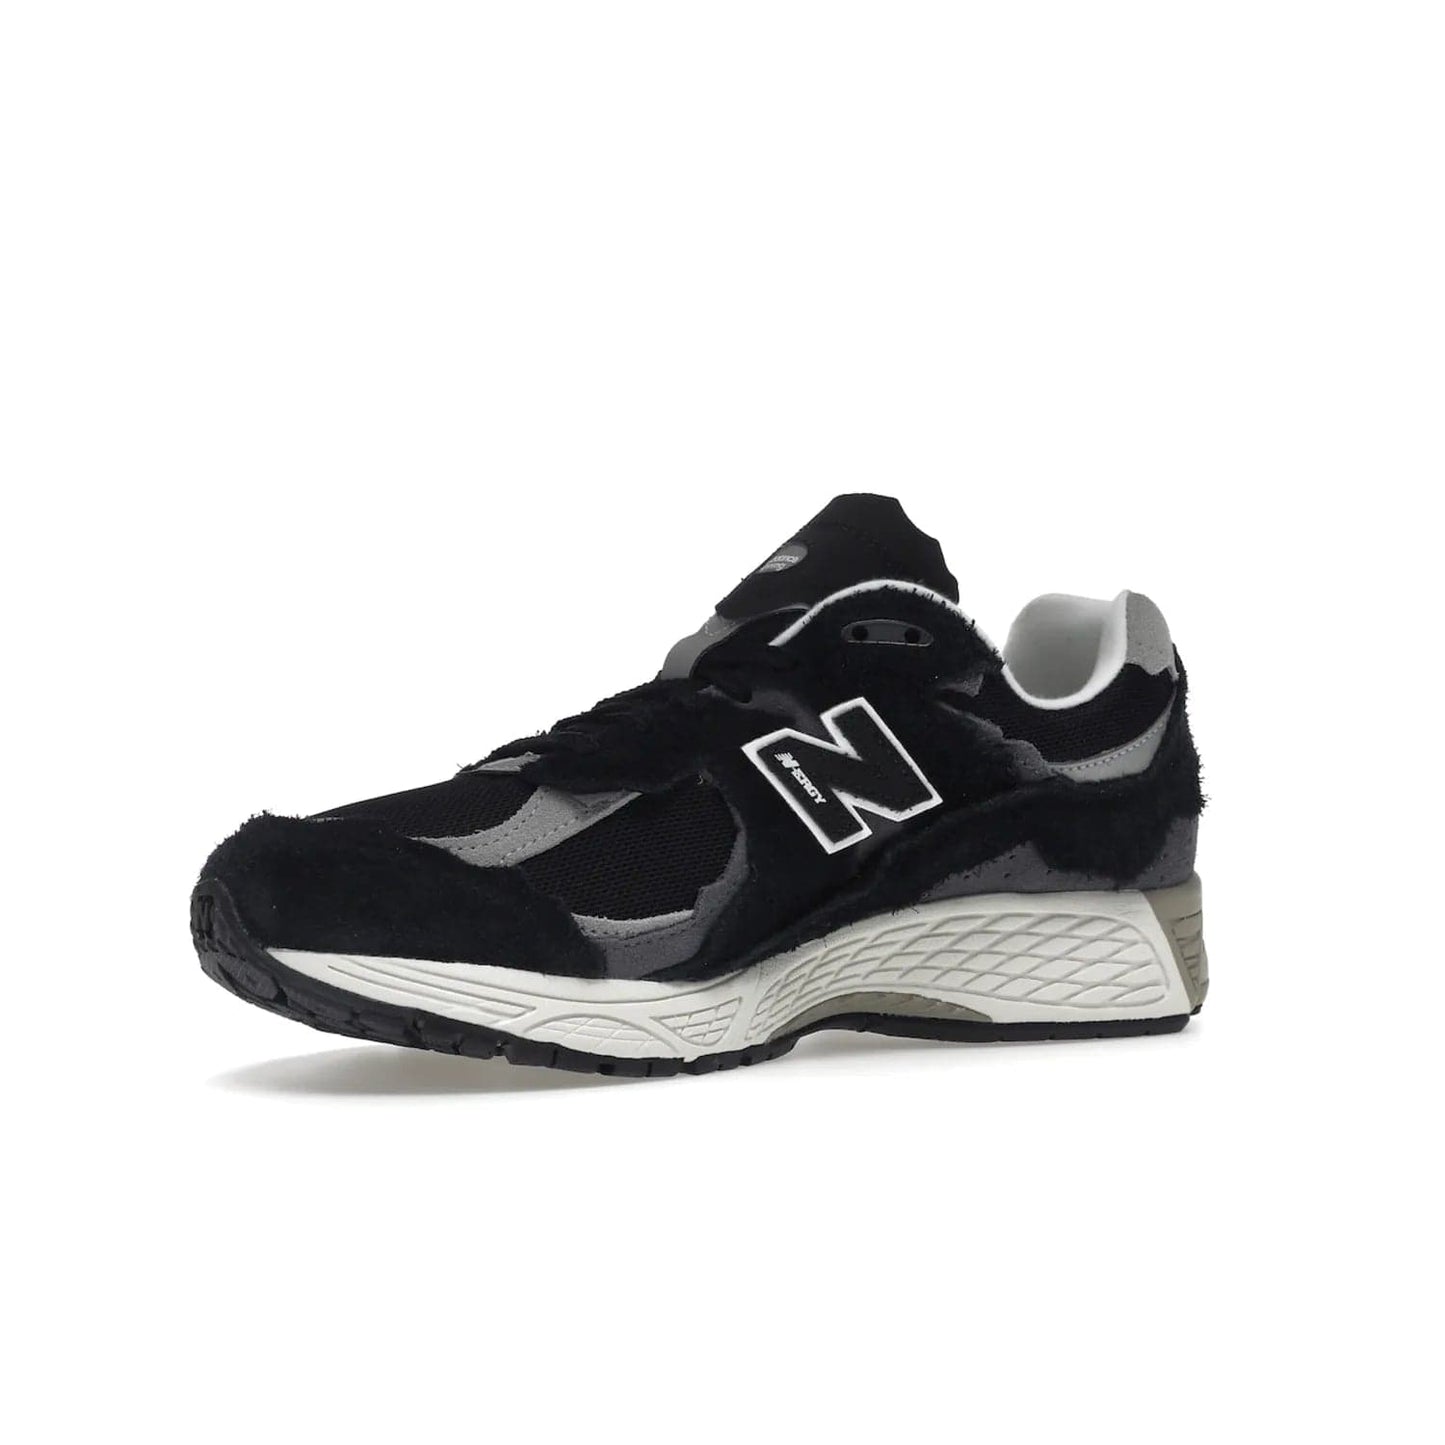 New Balance 2002R Protection Pack Black Grey - Image 16 - Only at www.BallersClubKickz.com - Look stylish in the New Balance 2002R Protection Pack Black Grey. Uppers constructed from premium materials like mesh and synthetic overlays. Iconic "N" emblem appears in white and black. ABZORB midsole for shock absorption and responsiveness. Black outsole for grip and traction. Lacing system offers customized fit and cushioned tongue and collar offer comfort and stability. Step up your style with this must-hav